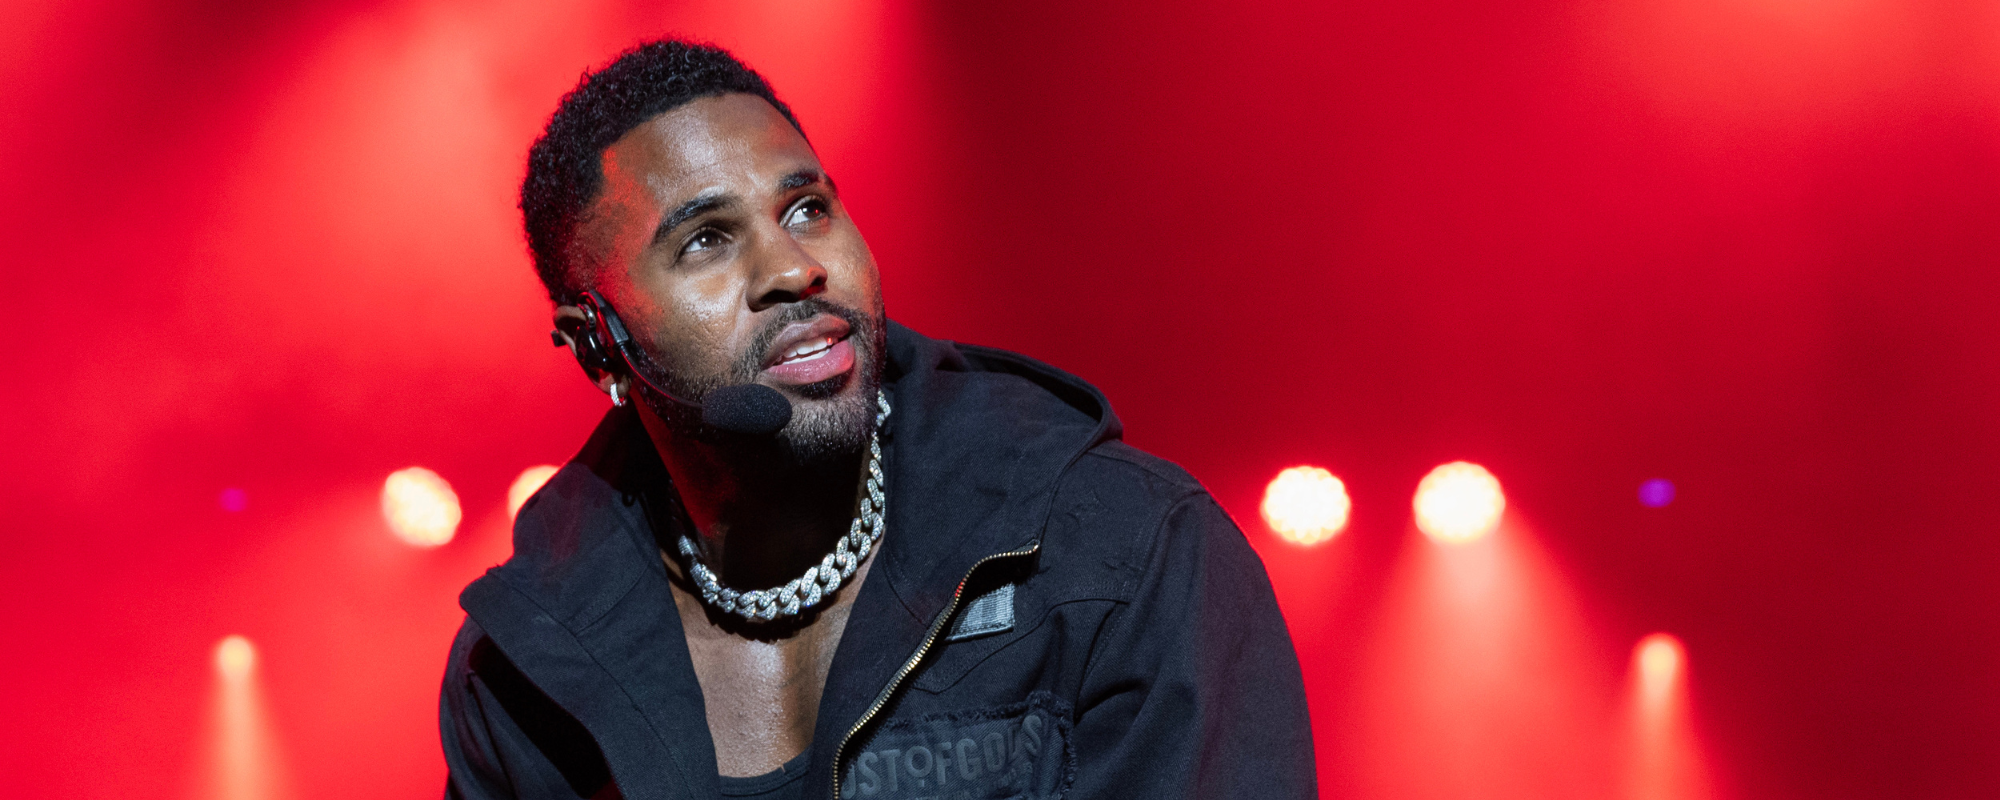 Jason Derulo and Meghan Trainor Team Up For “Hands On Me”